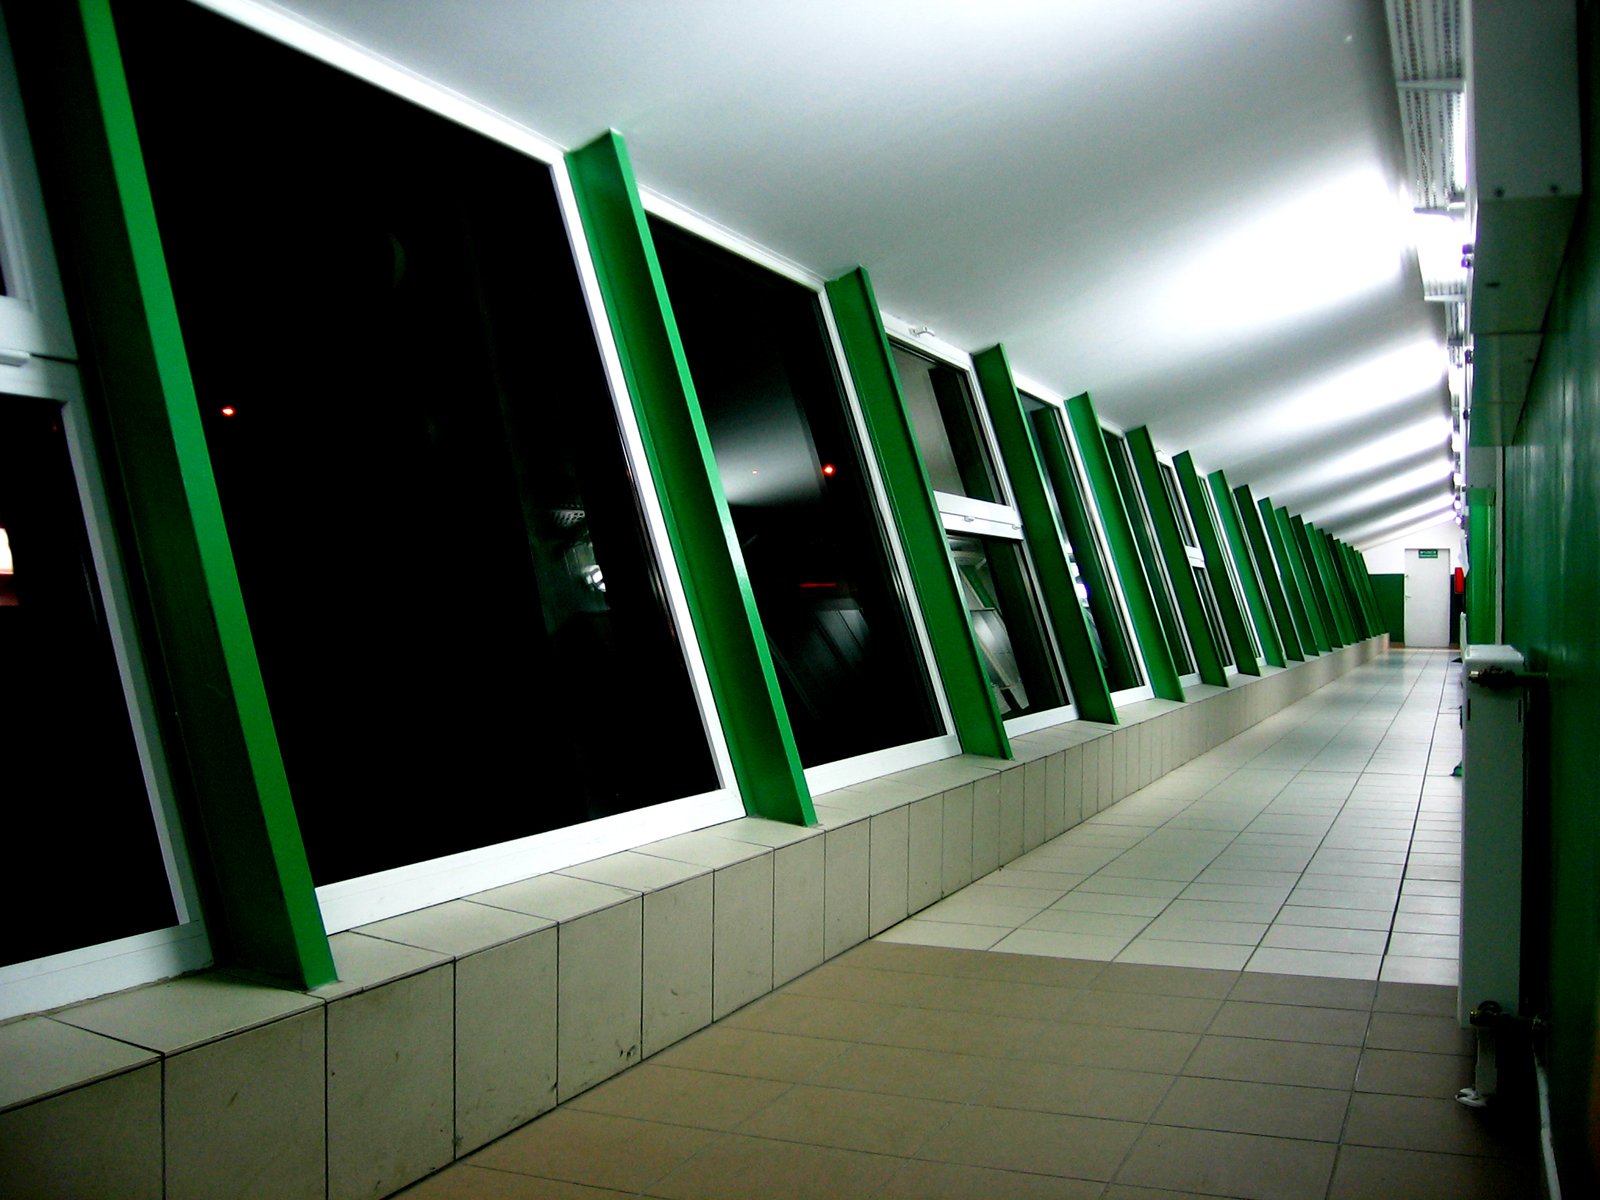 the green and white panels line the wall along an alley